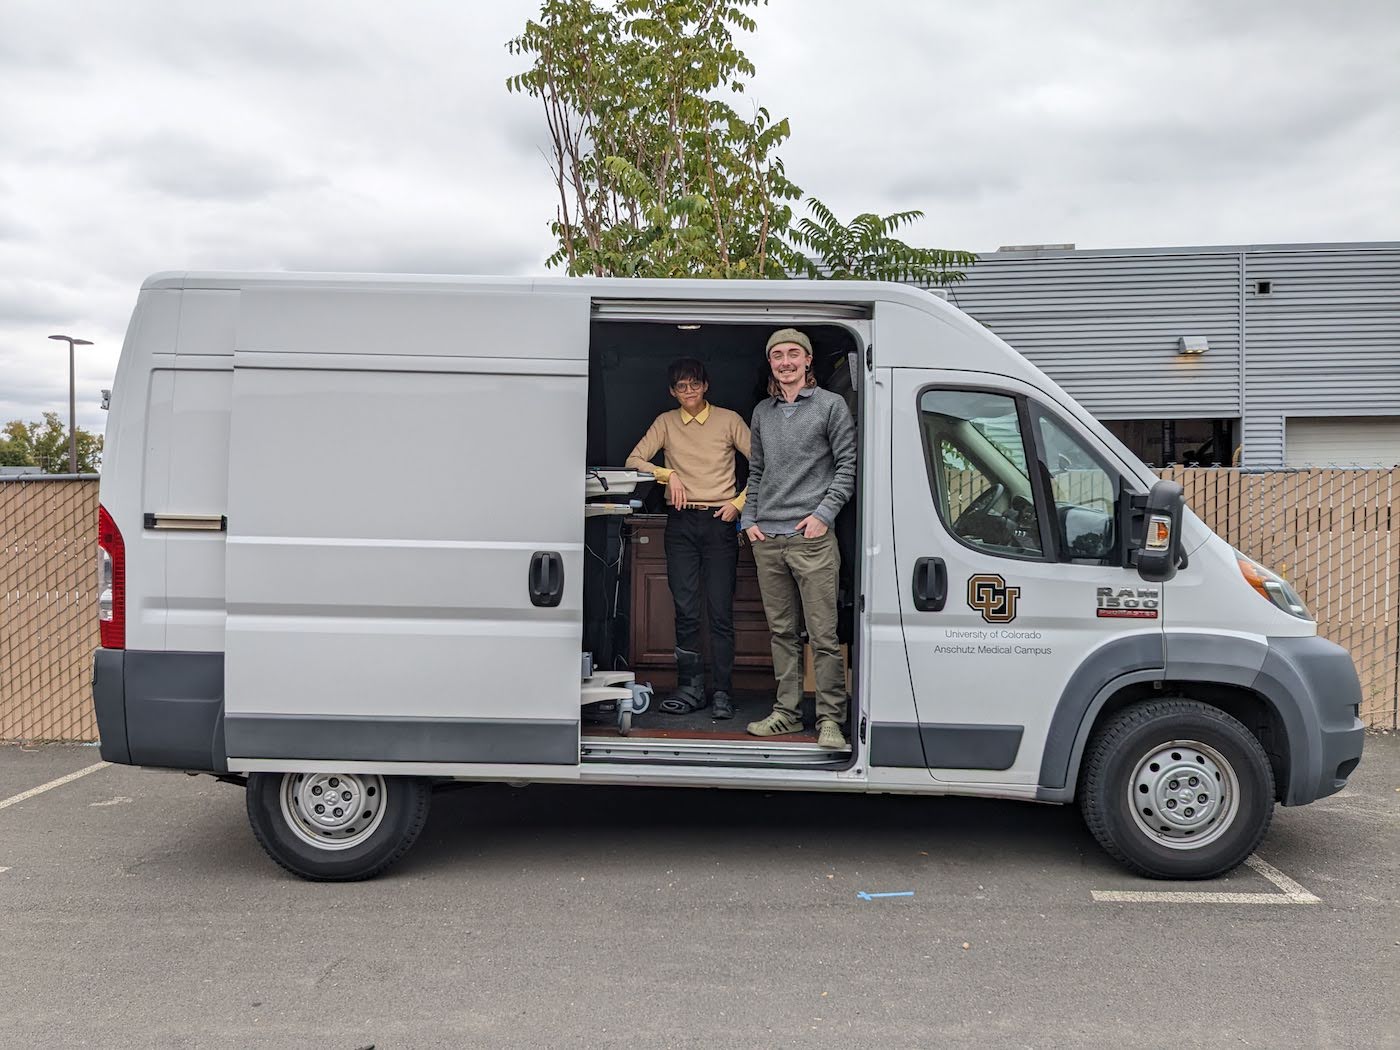 Studying Weed from Dispensaries with a Mobile Laboratory